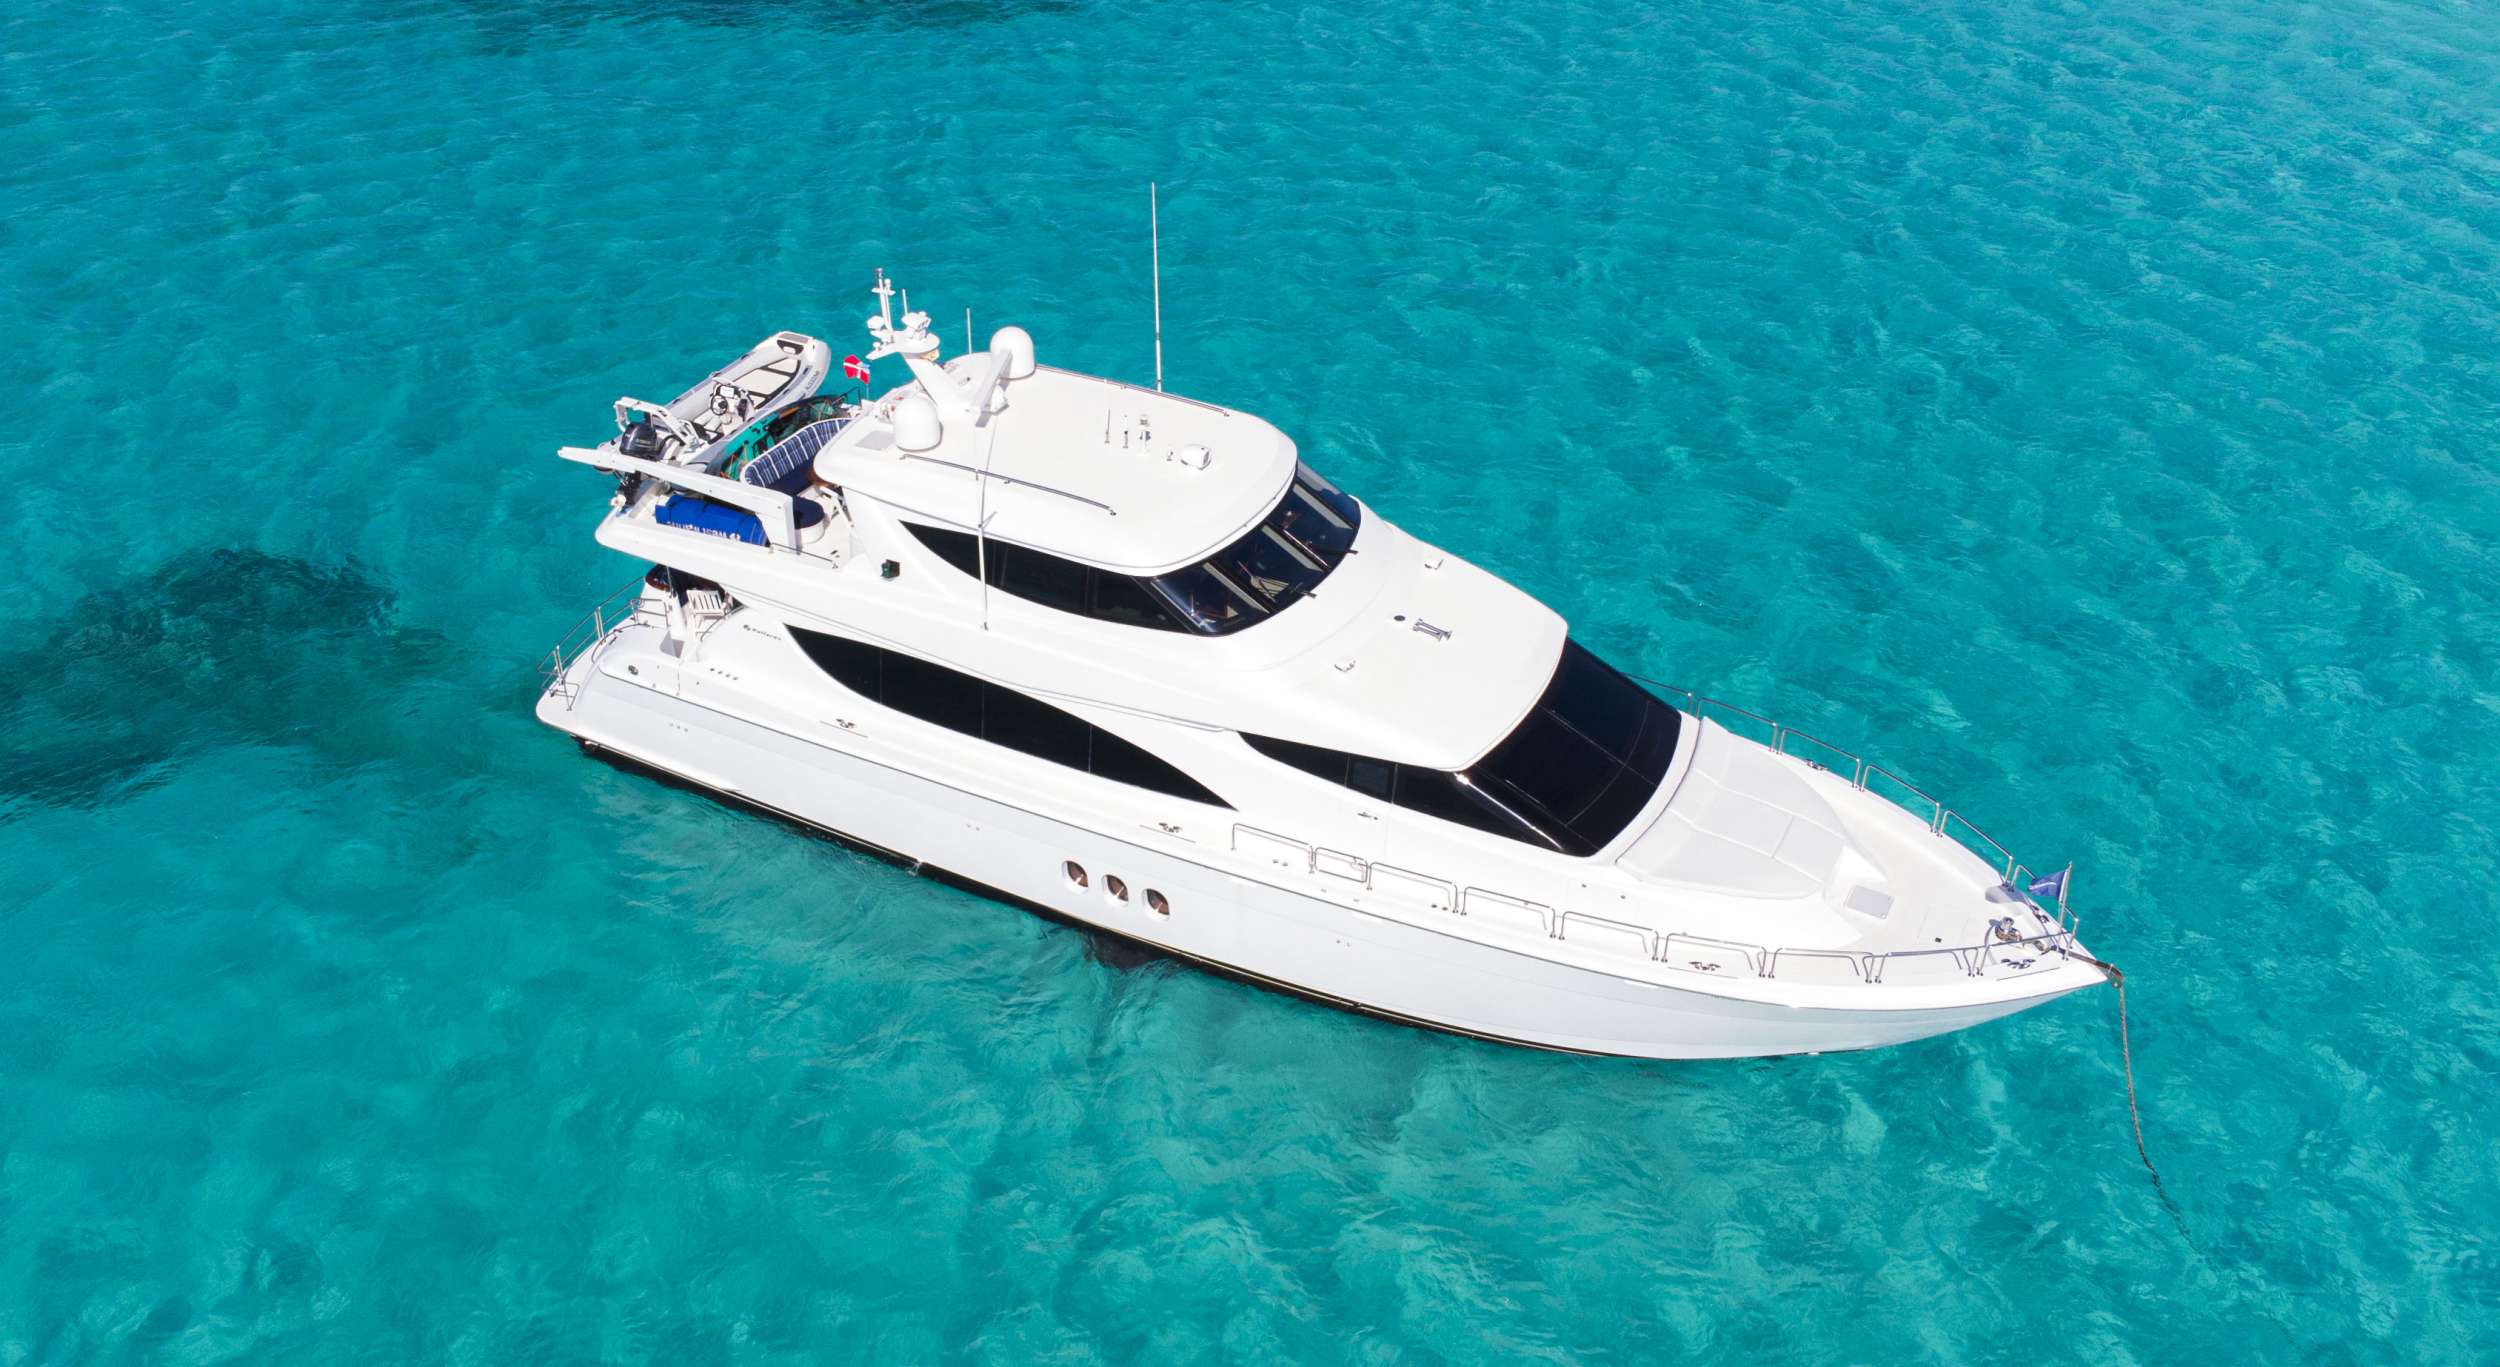 Gail Force II - Yacht Charter Fort Lauderdale & Boat hire in US East Coast & Bahamas 1